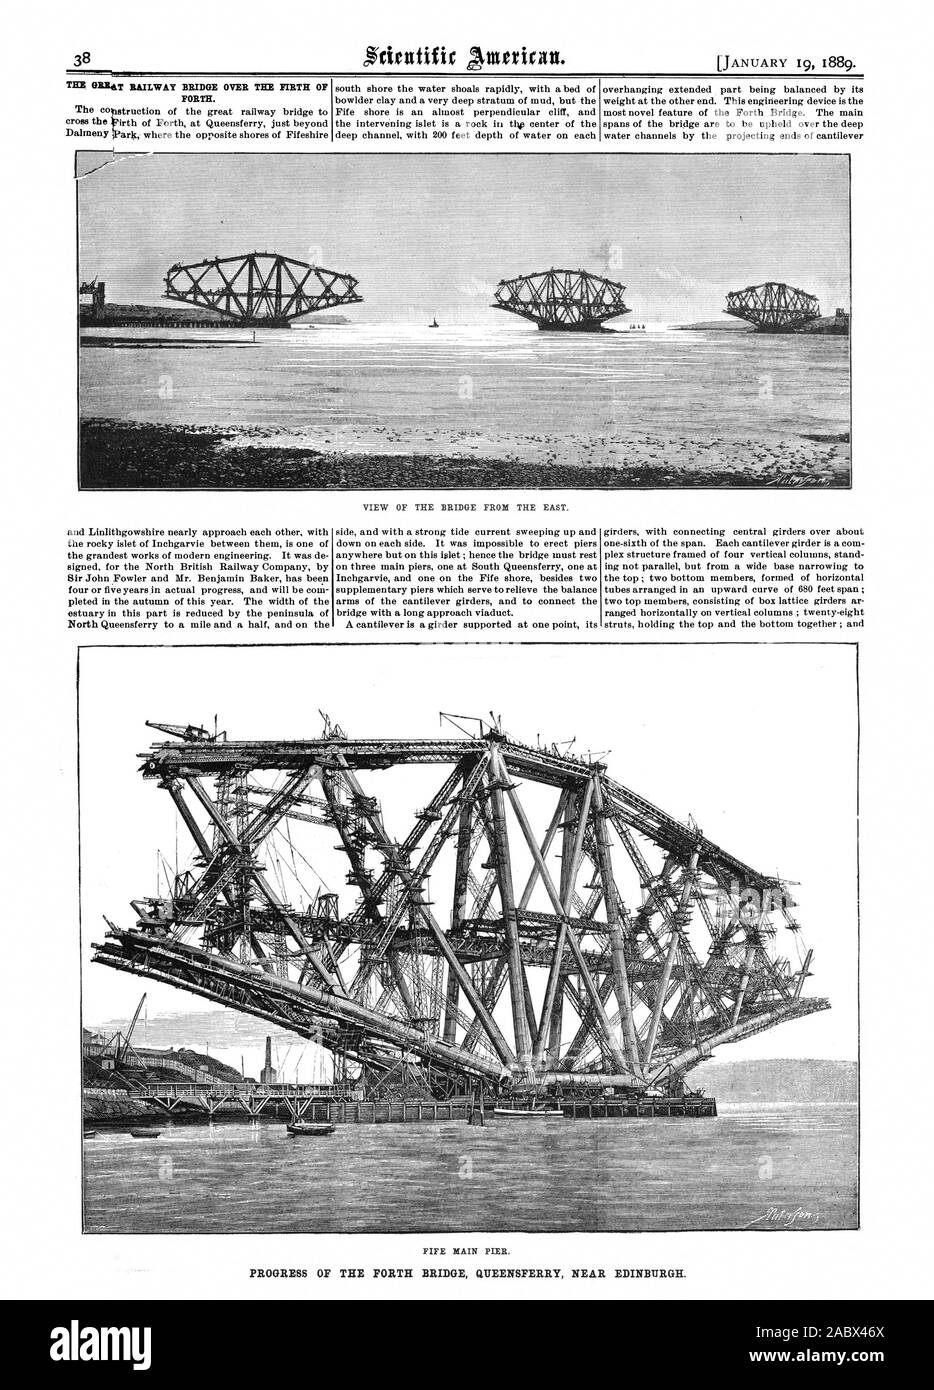 THE GREAT RAILWAY BRIDGE OVER THE FIRTH OF FORTH. The co struction of the great railway bridge to cross the irth of Forth at Queensferry just beyond south shore the water shoals rapidly with a bed of bowlder clay and a very deep stratum of mud but the Fife shore is an almost perpendicular cliff and the intervening islet is a rock ill the center of the deep channel with 200 feet depth of water on each overhanging extended part being balanced by its weight at the other end. This engineering device is the most novel feature of the Forth Bridge. The main spans of the bridge are to be upheld over Stock Photo